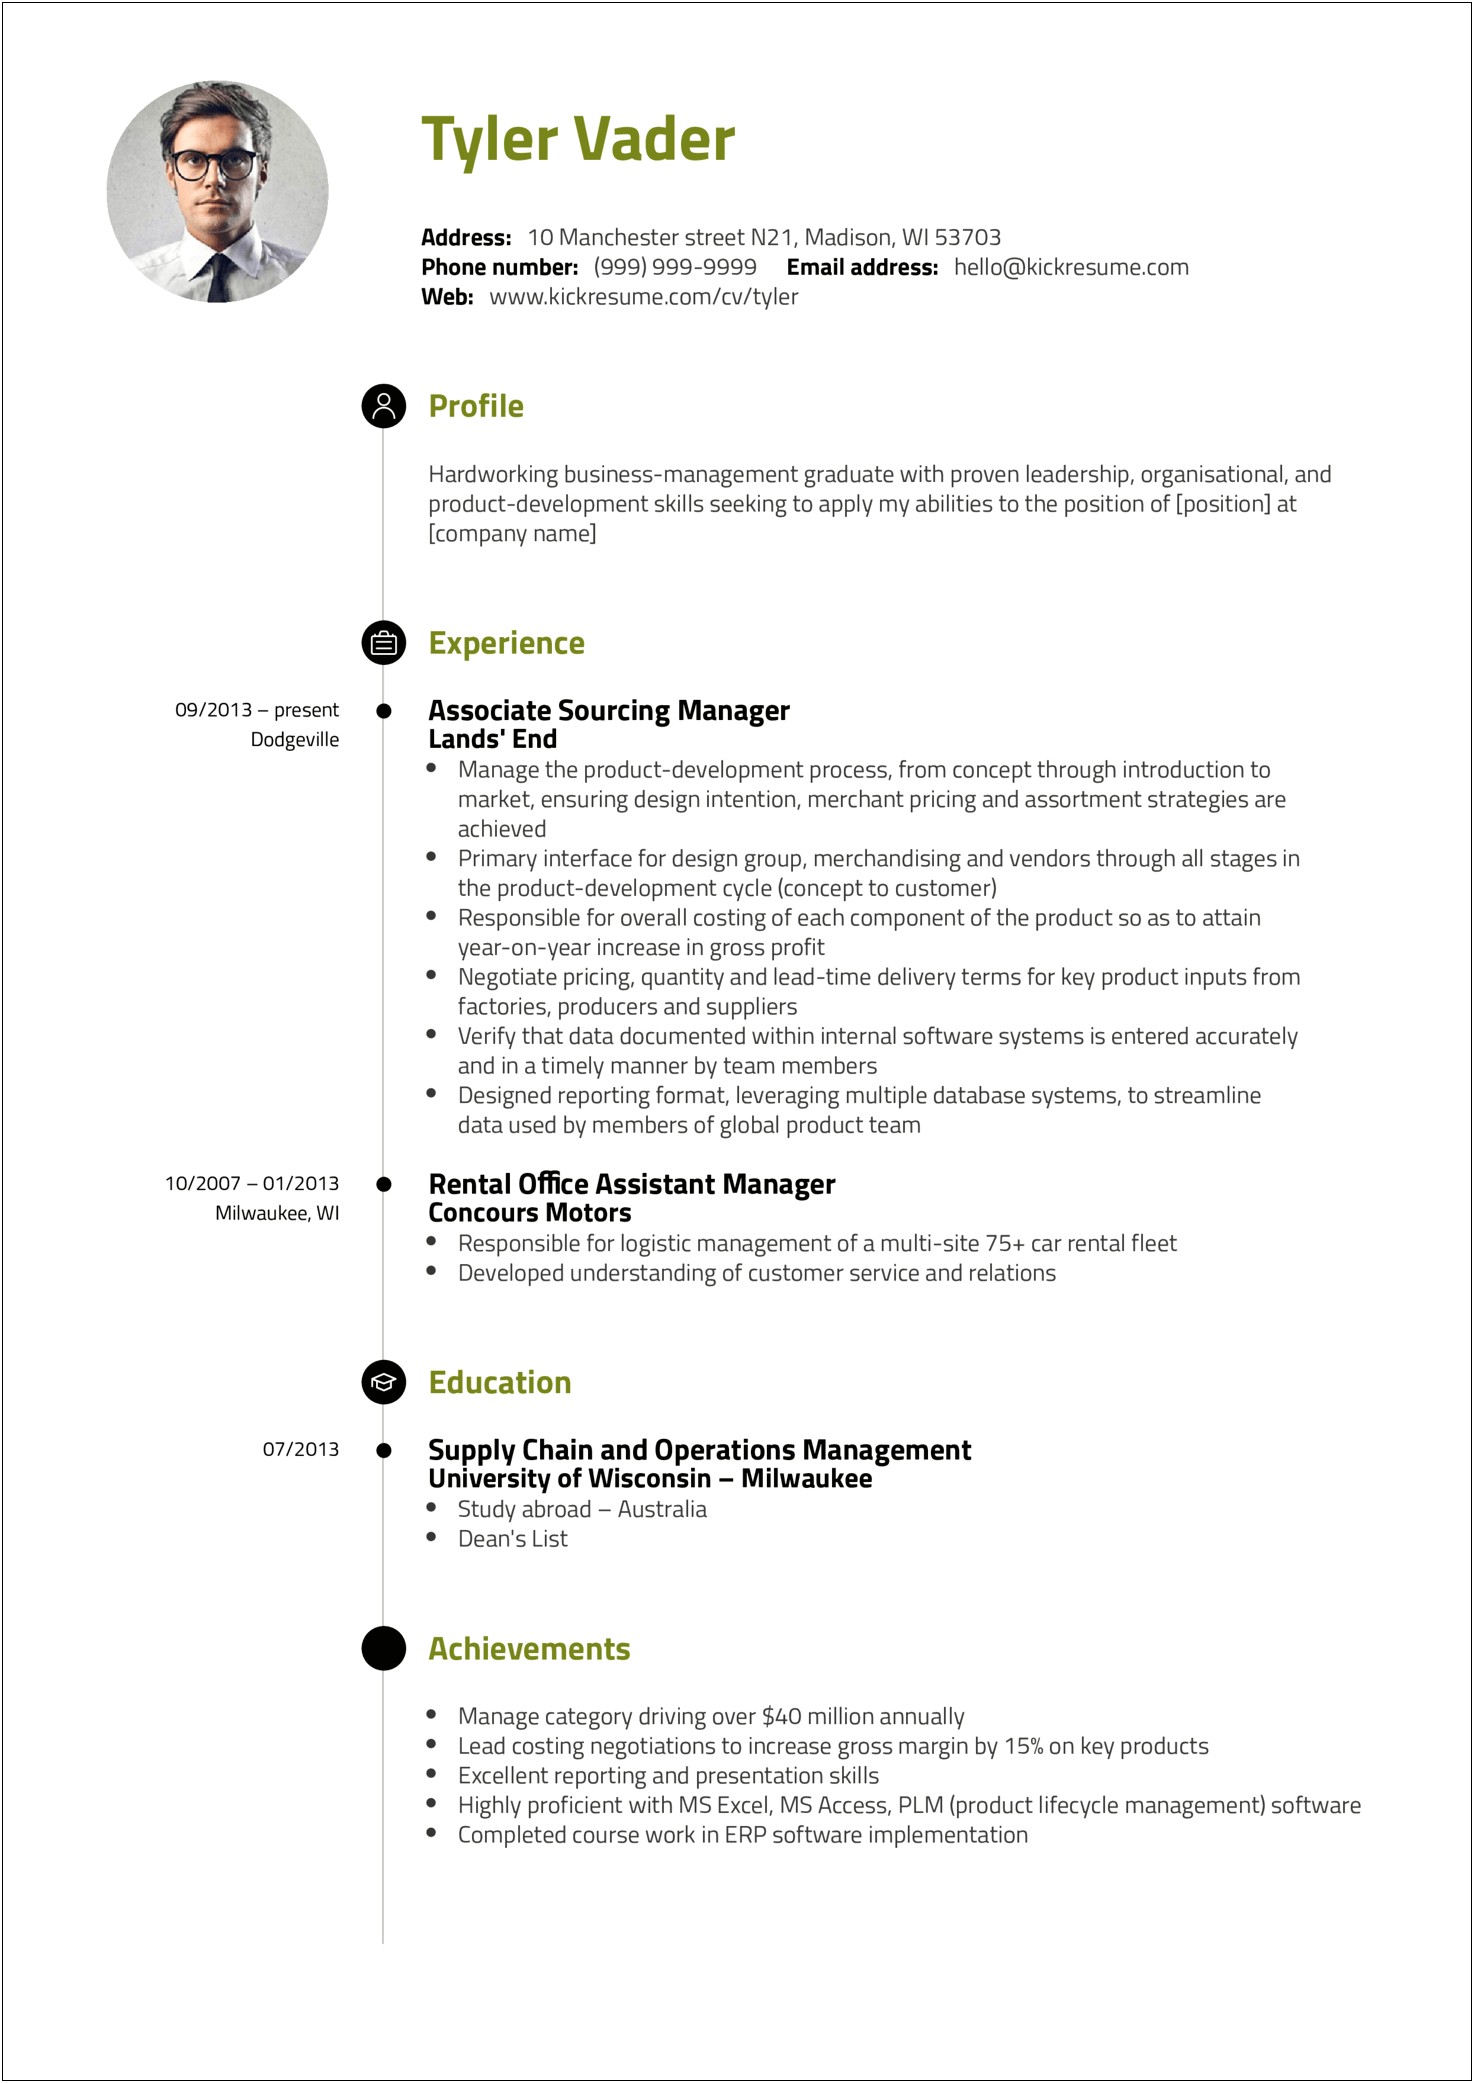 Resume With Masters Degree S Sample